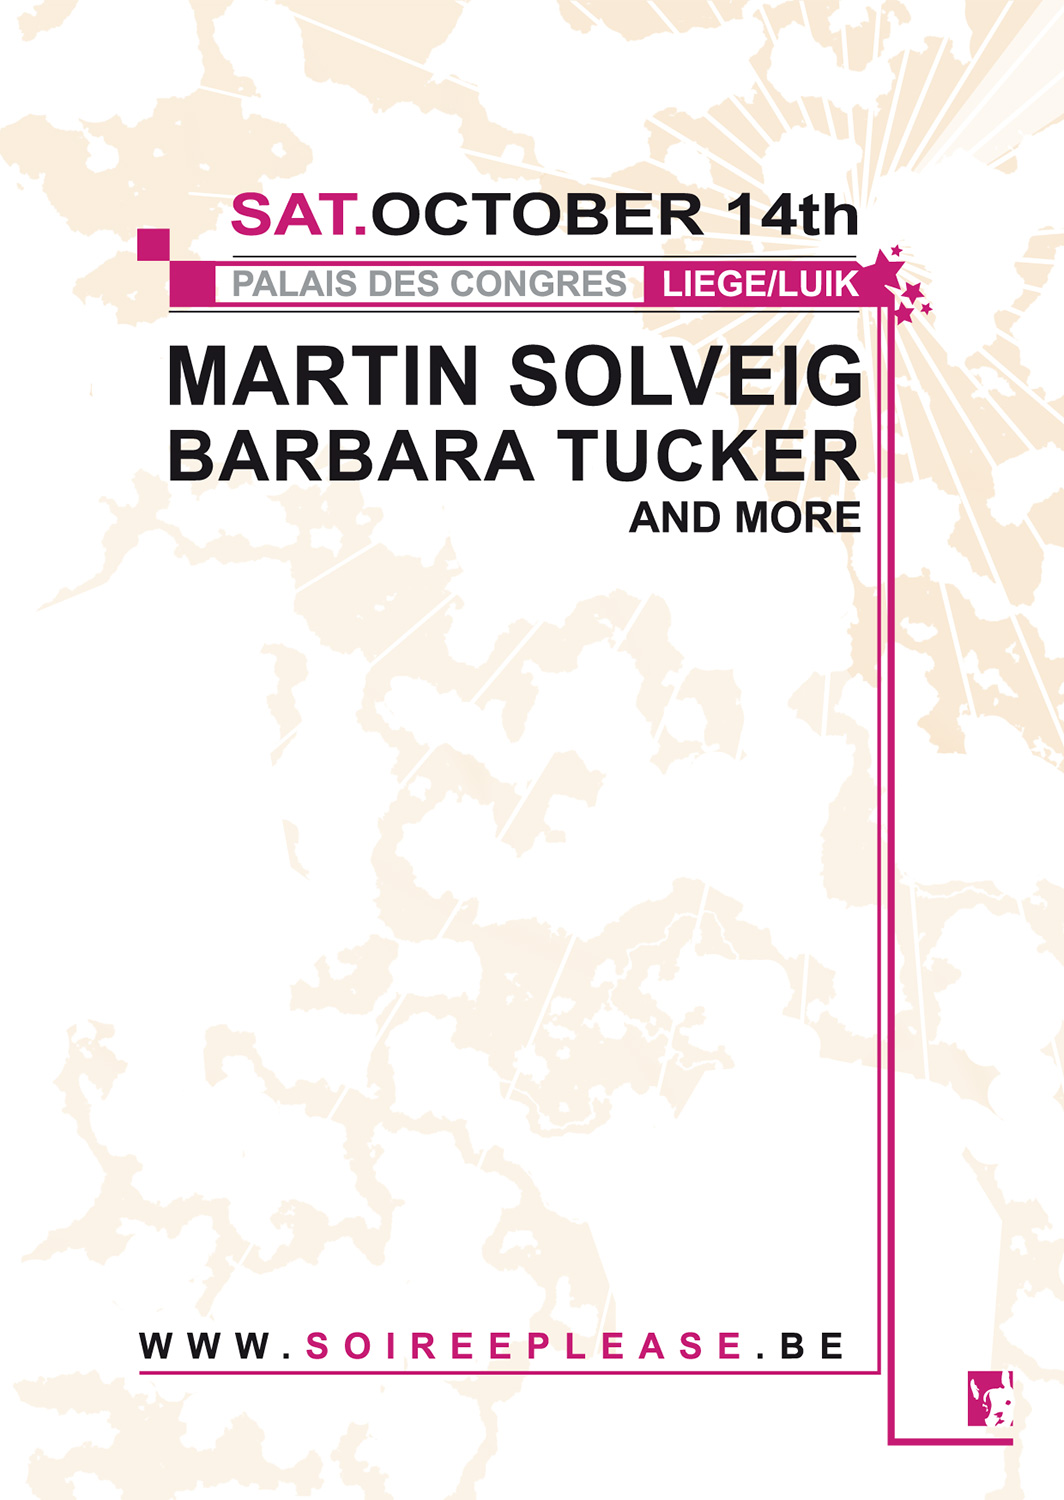 Rear card for an event with Martin Solveig and Barbara Tucke